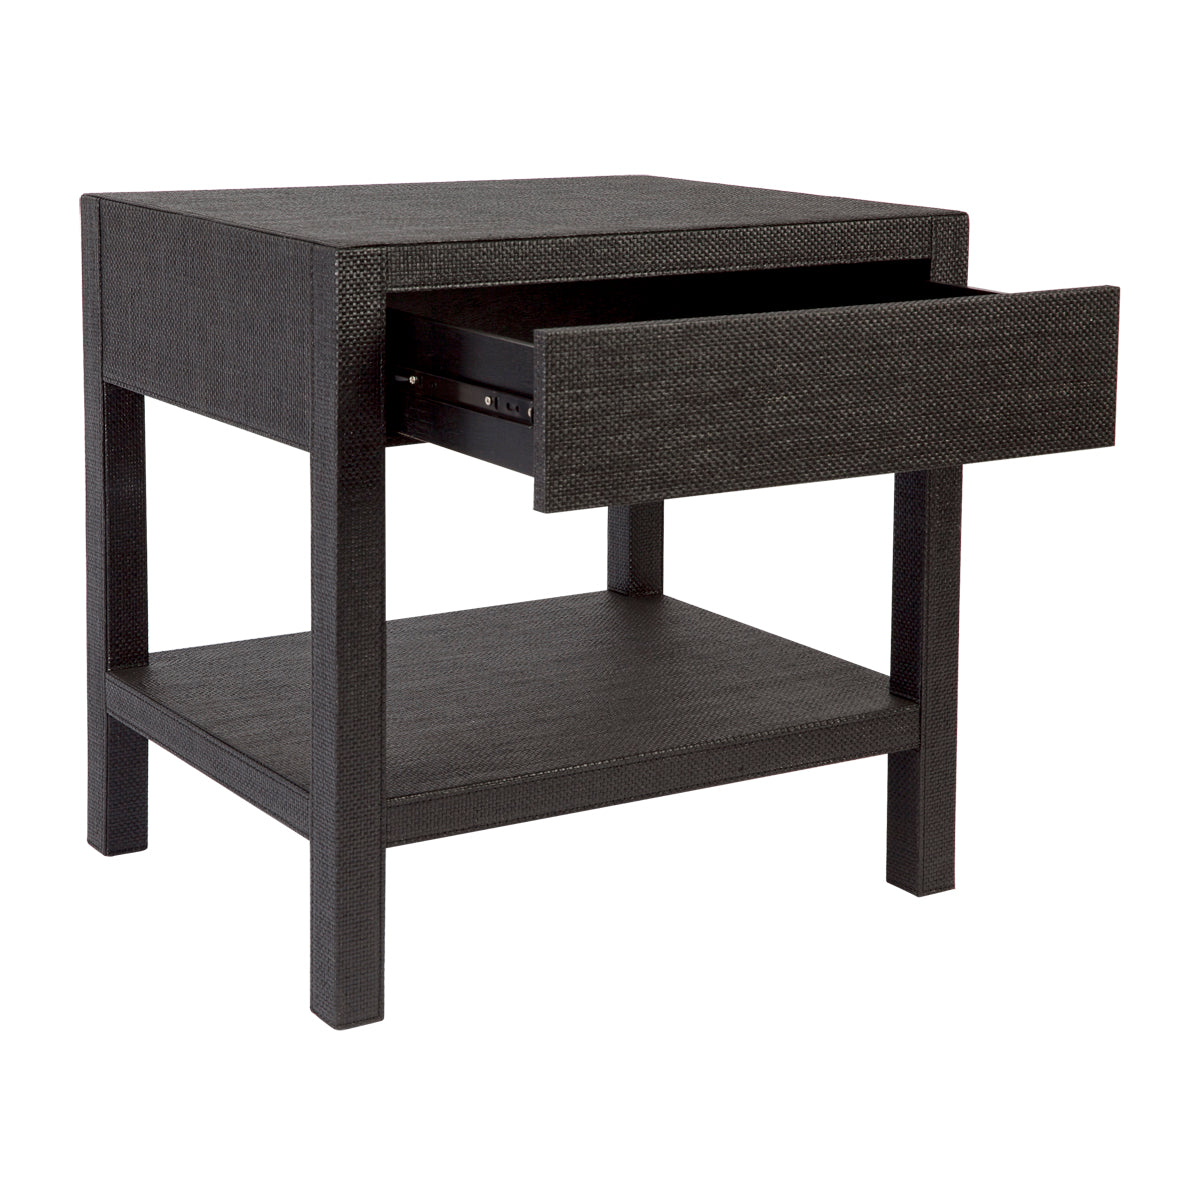 Chiswick Bedside Table - Black